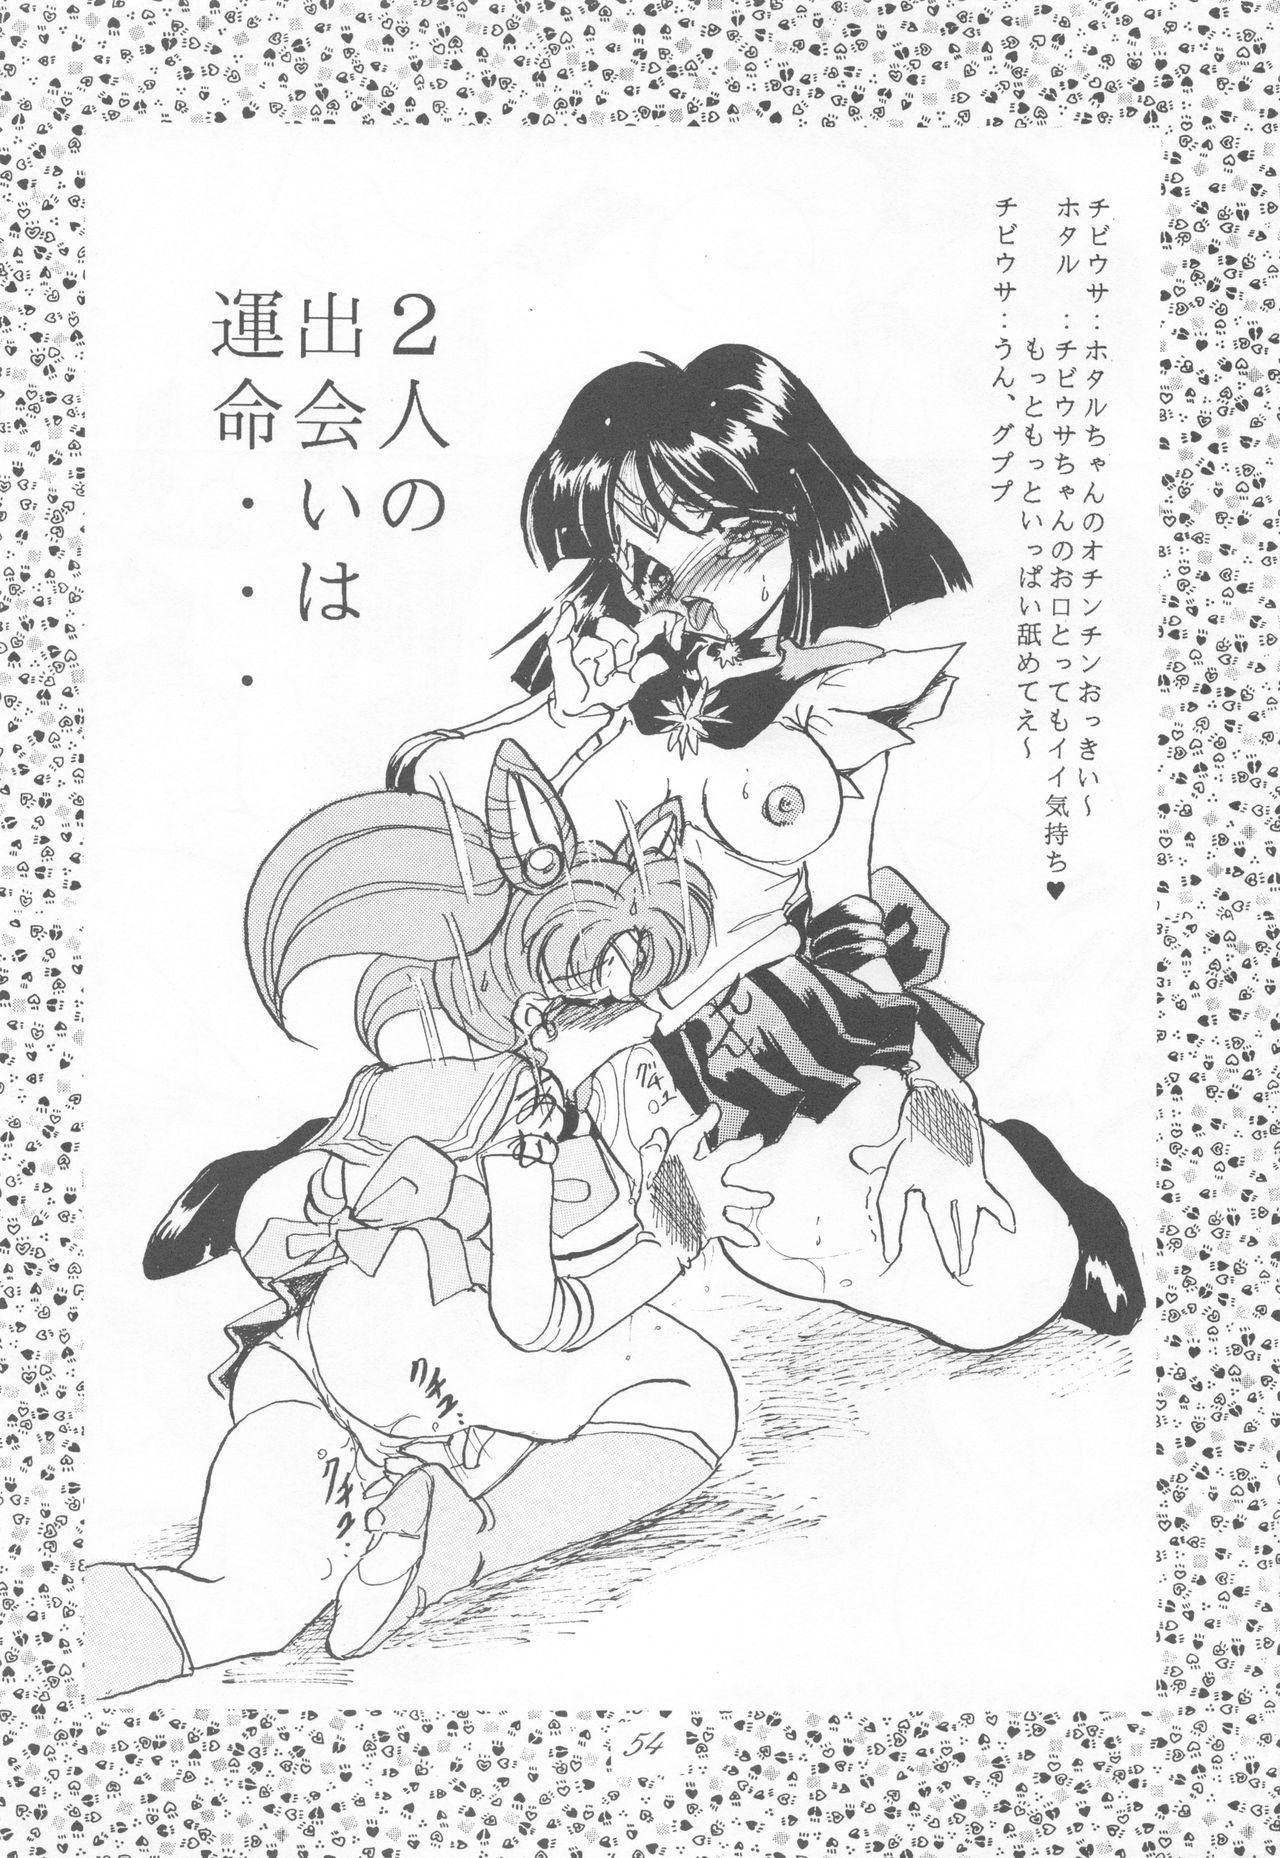 Sailor Moon 1 Page Gekijou P2 - SAILOR MOON ONE PAGE THEATER II 53